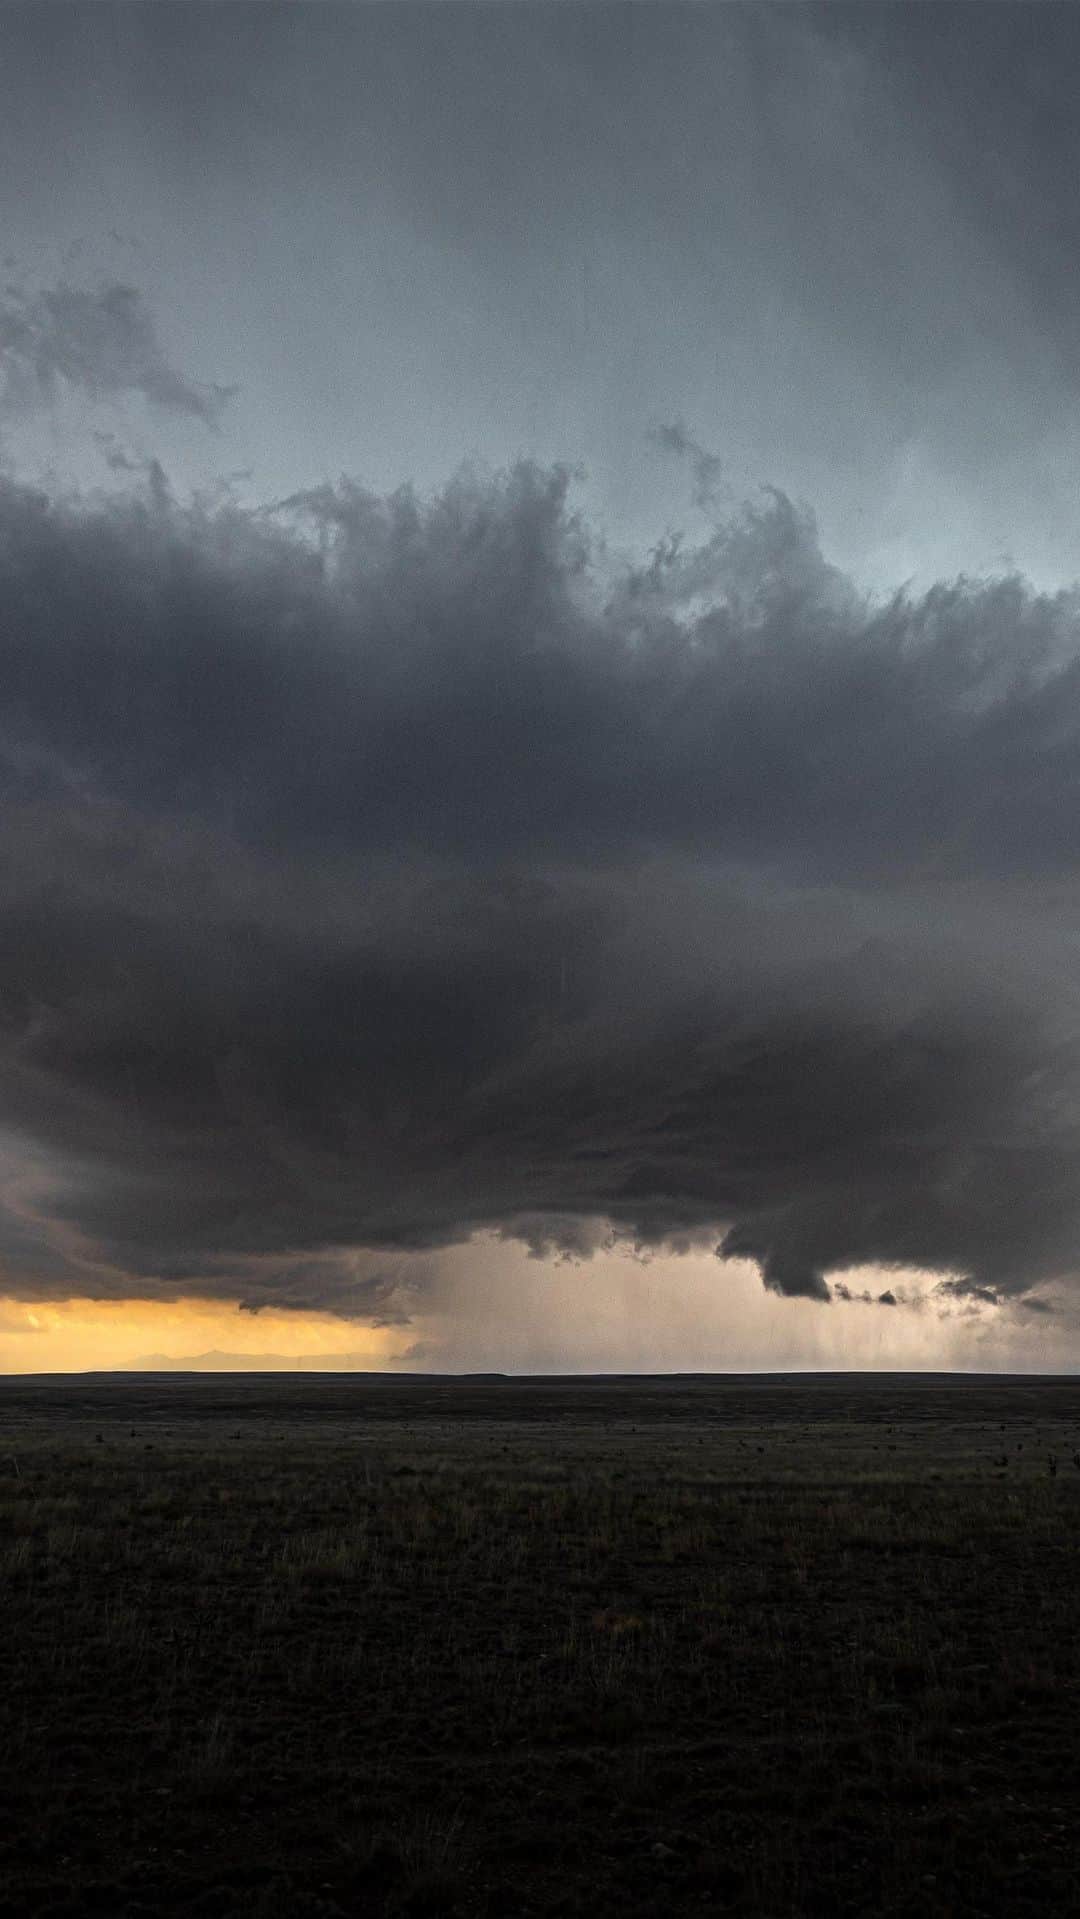 Keith Ladzinskiのインスタグラム：「A tornadic supercell, twisting ominously over the pains of west Texas. Filmed for @canonusa with the #R5C which was the perfect camera for this project, small, durable and allowing me to film in 8k RAW for long durations without the worry of overheating. More soon on this incredibly fun project! - @mikeolbinski @tjtriage @brittmumma @taylor._shaffer @mindframecinema @shotoversystems @niteize @anker_official @poweredbyowc @sendbars」